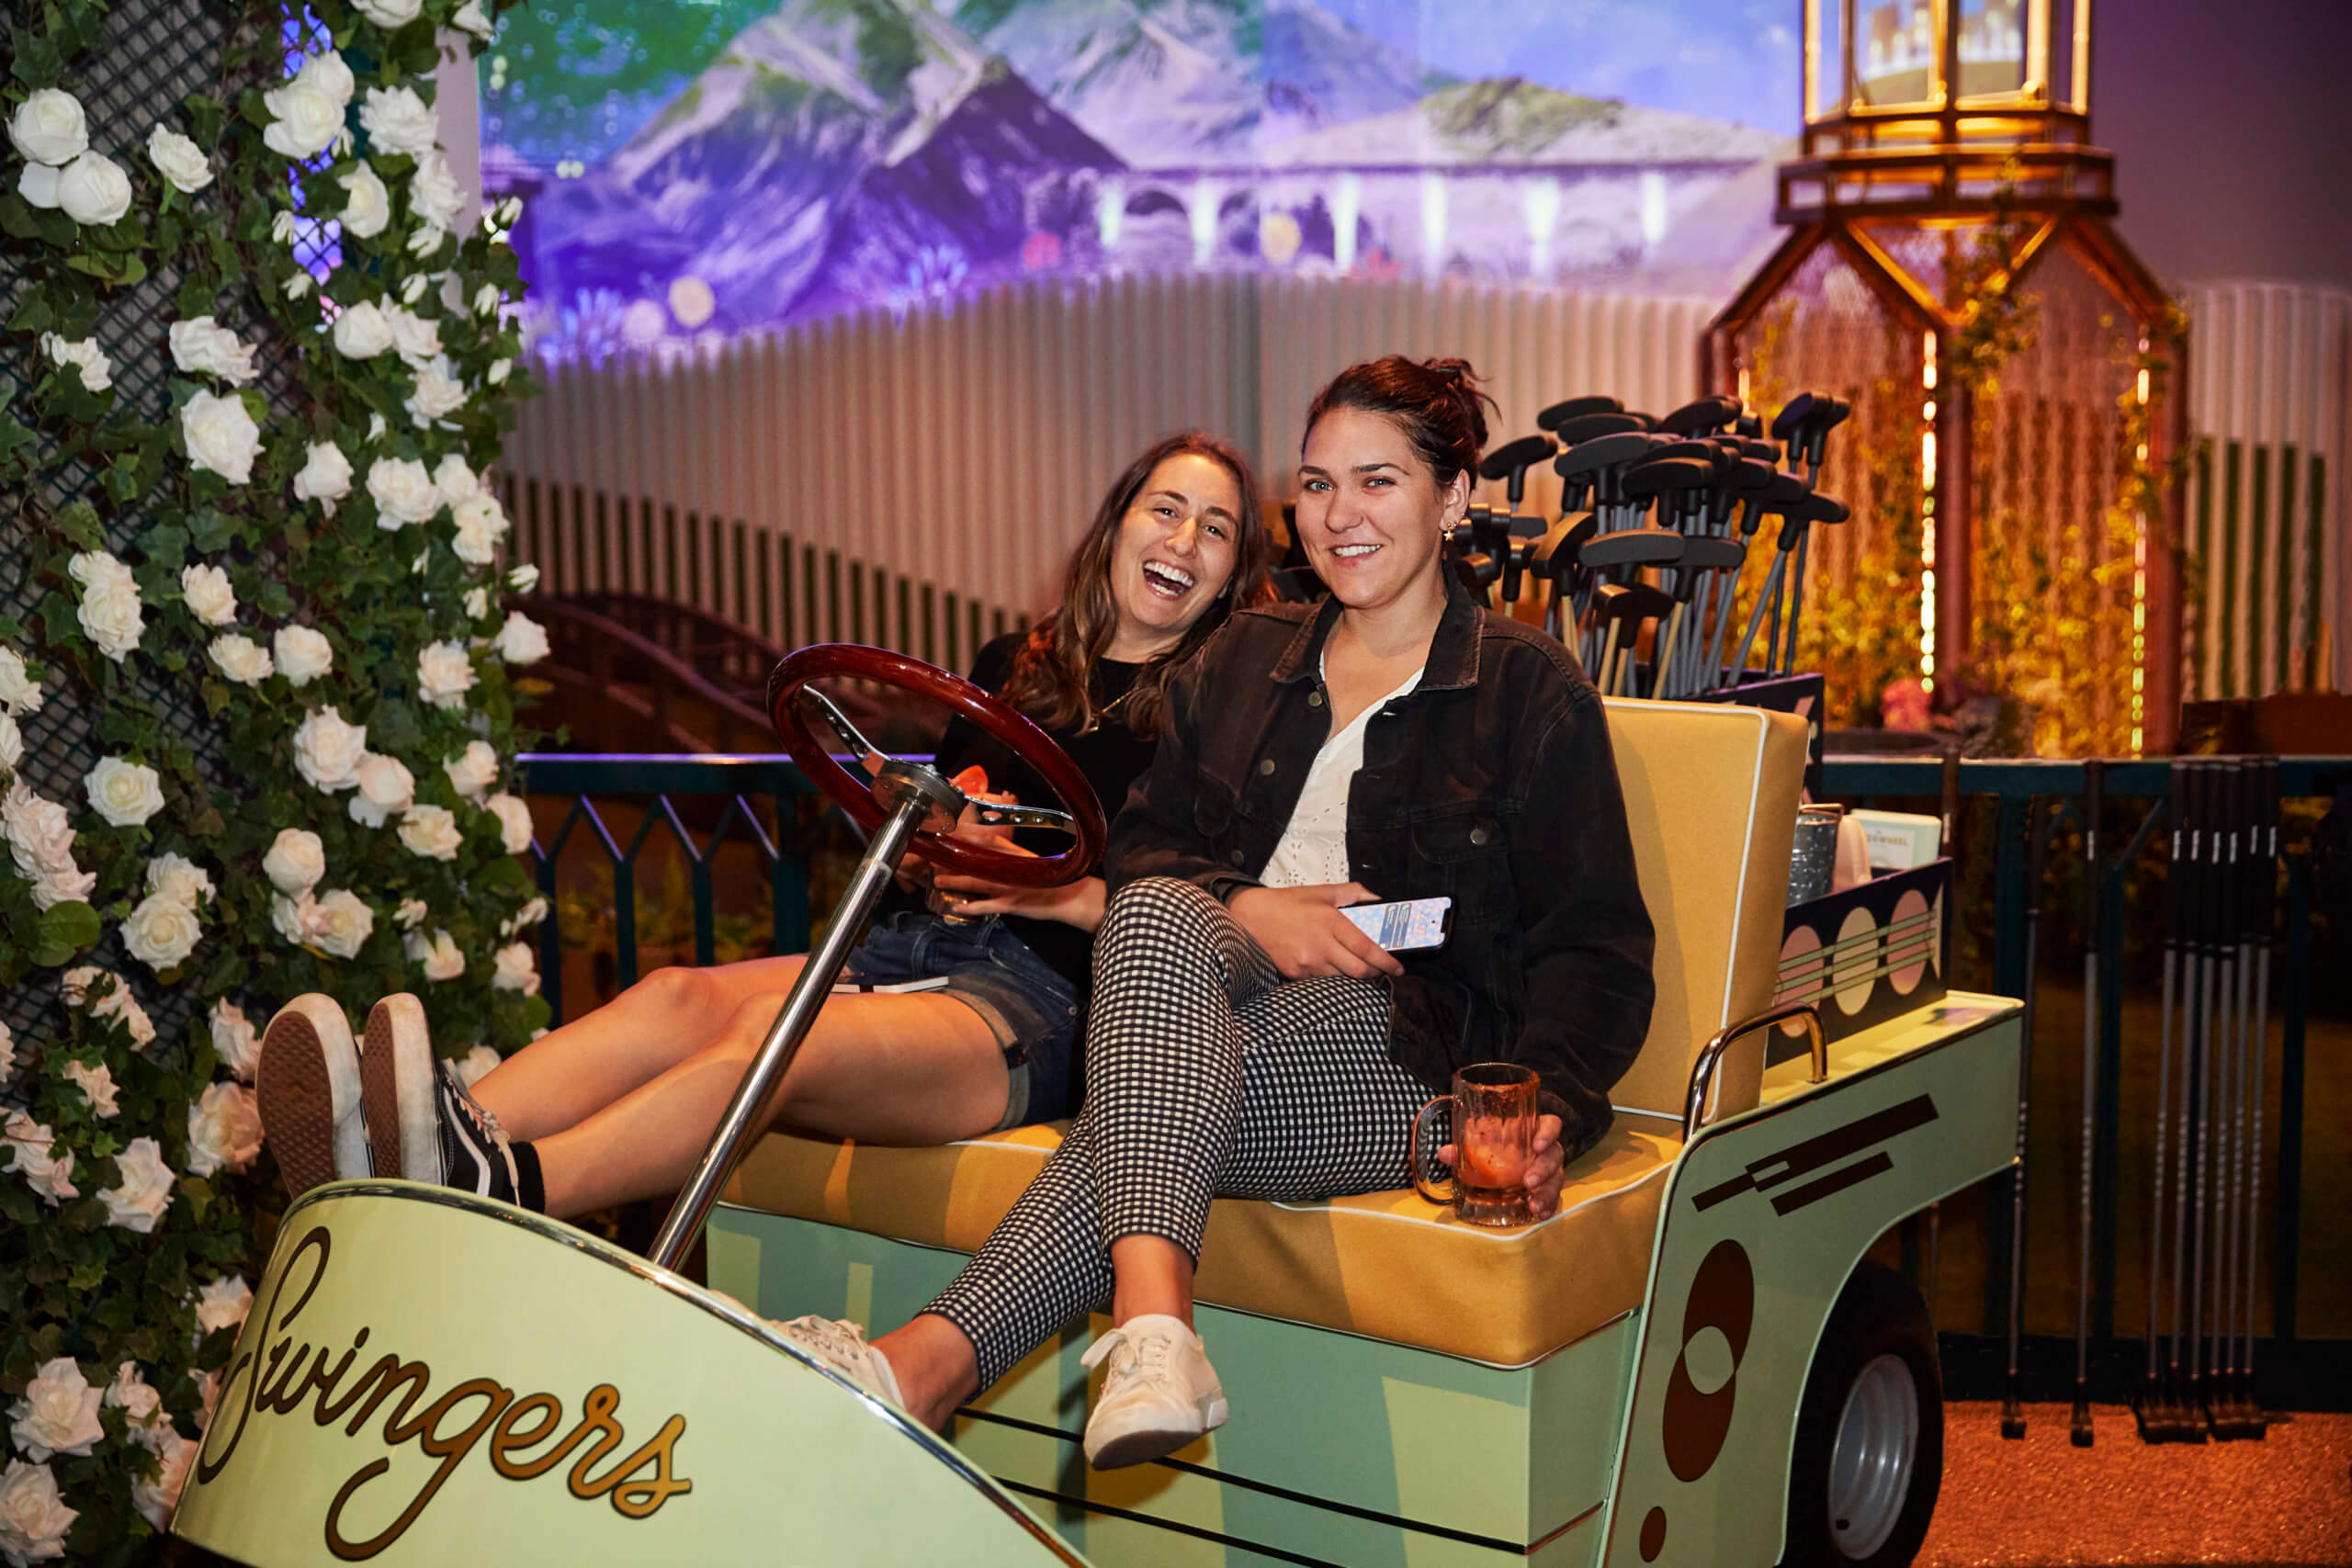 Swingers brings immersive mini golf experience to New York City with local fare and drinks amNewYork image